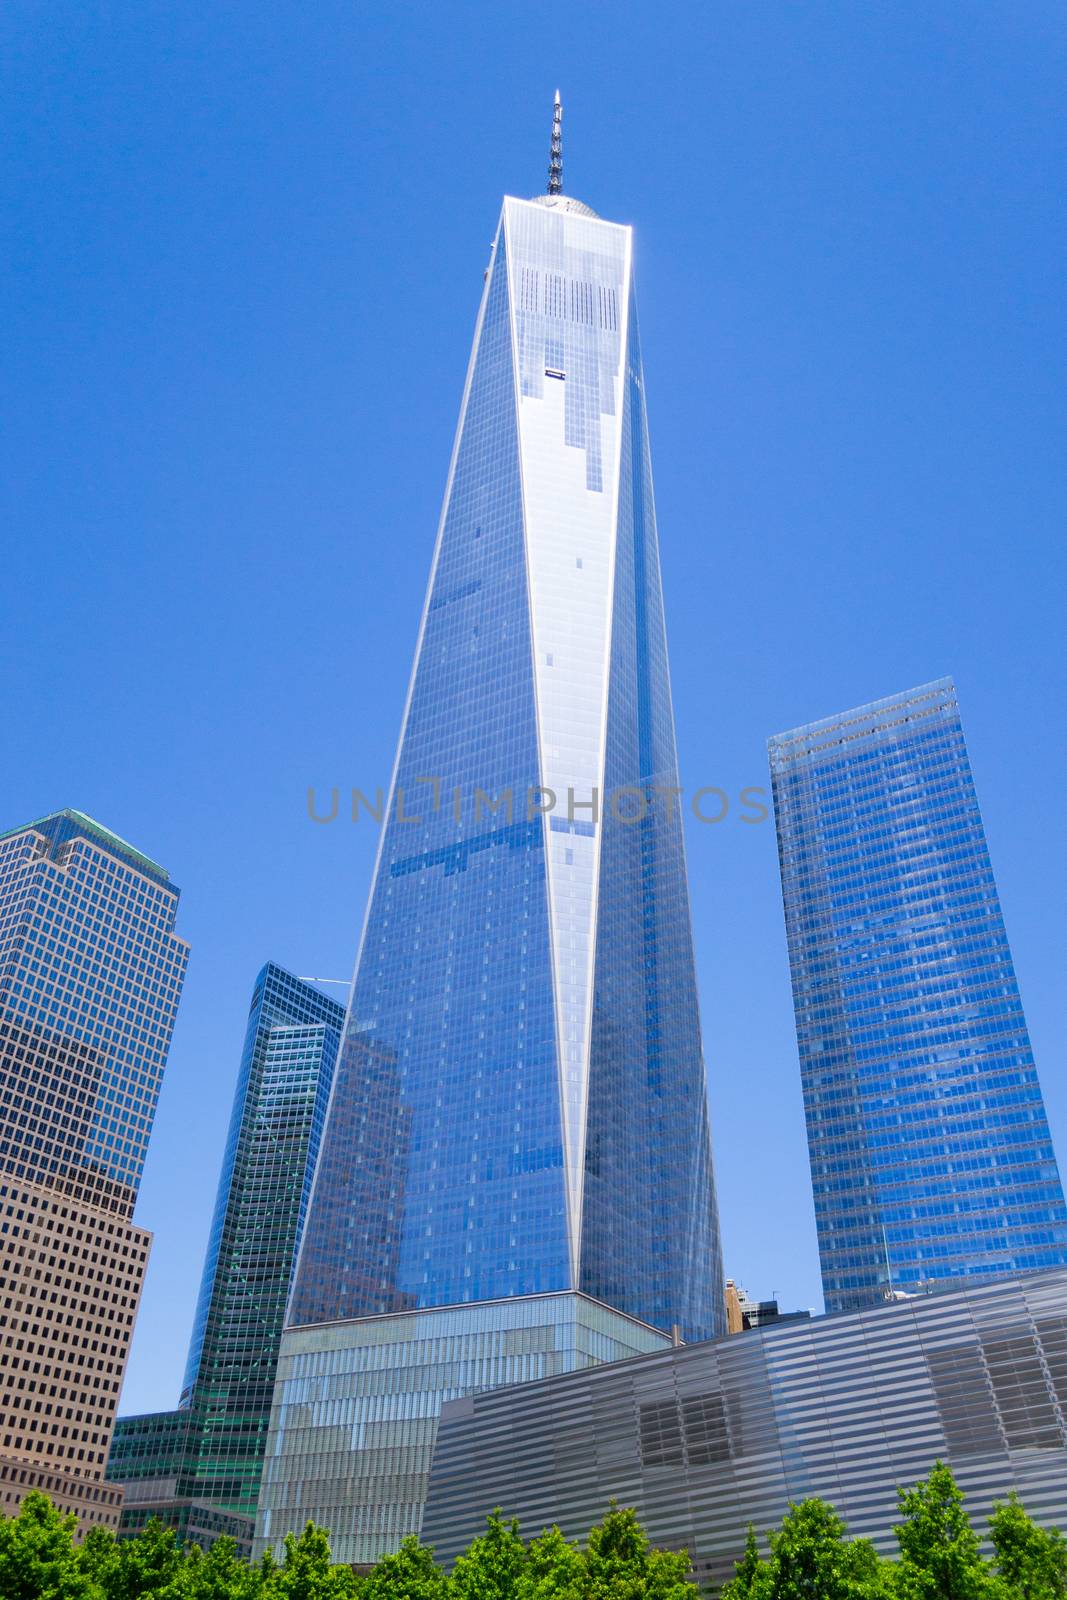 The main building at One World Trade Center is the 4th tallest building in the world